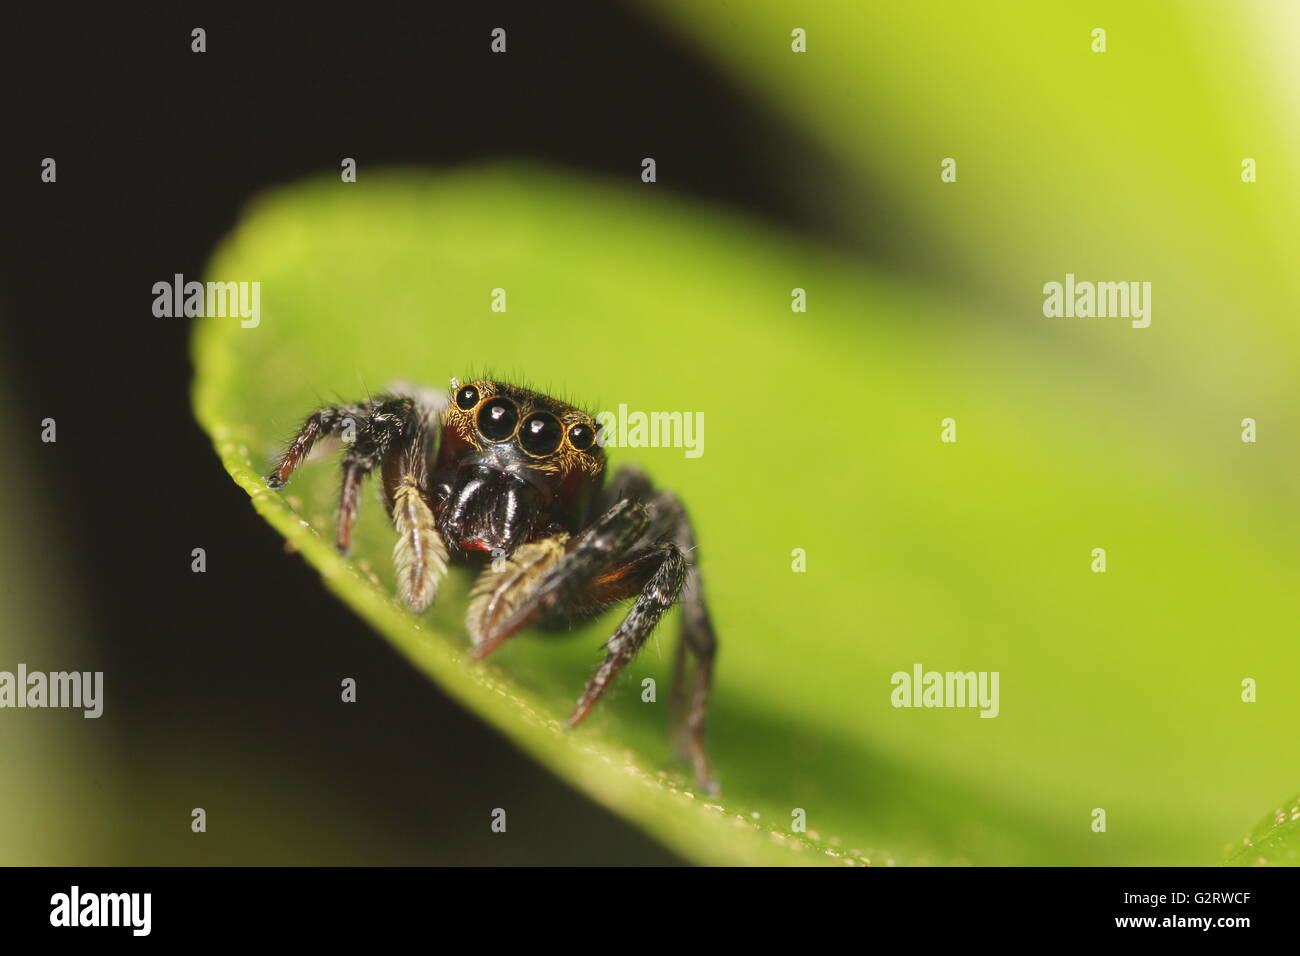 Brown jumping spider showing its jackknife fangs, or chelicerae. Stock Photo